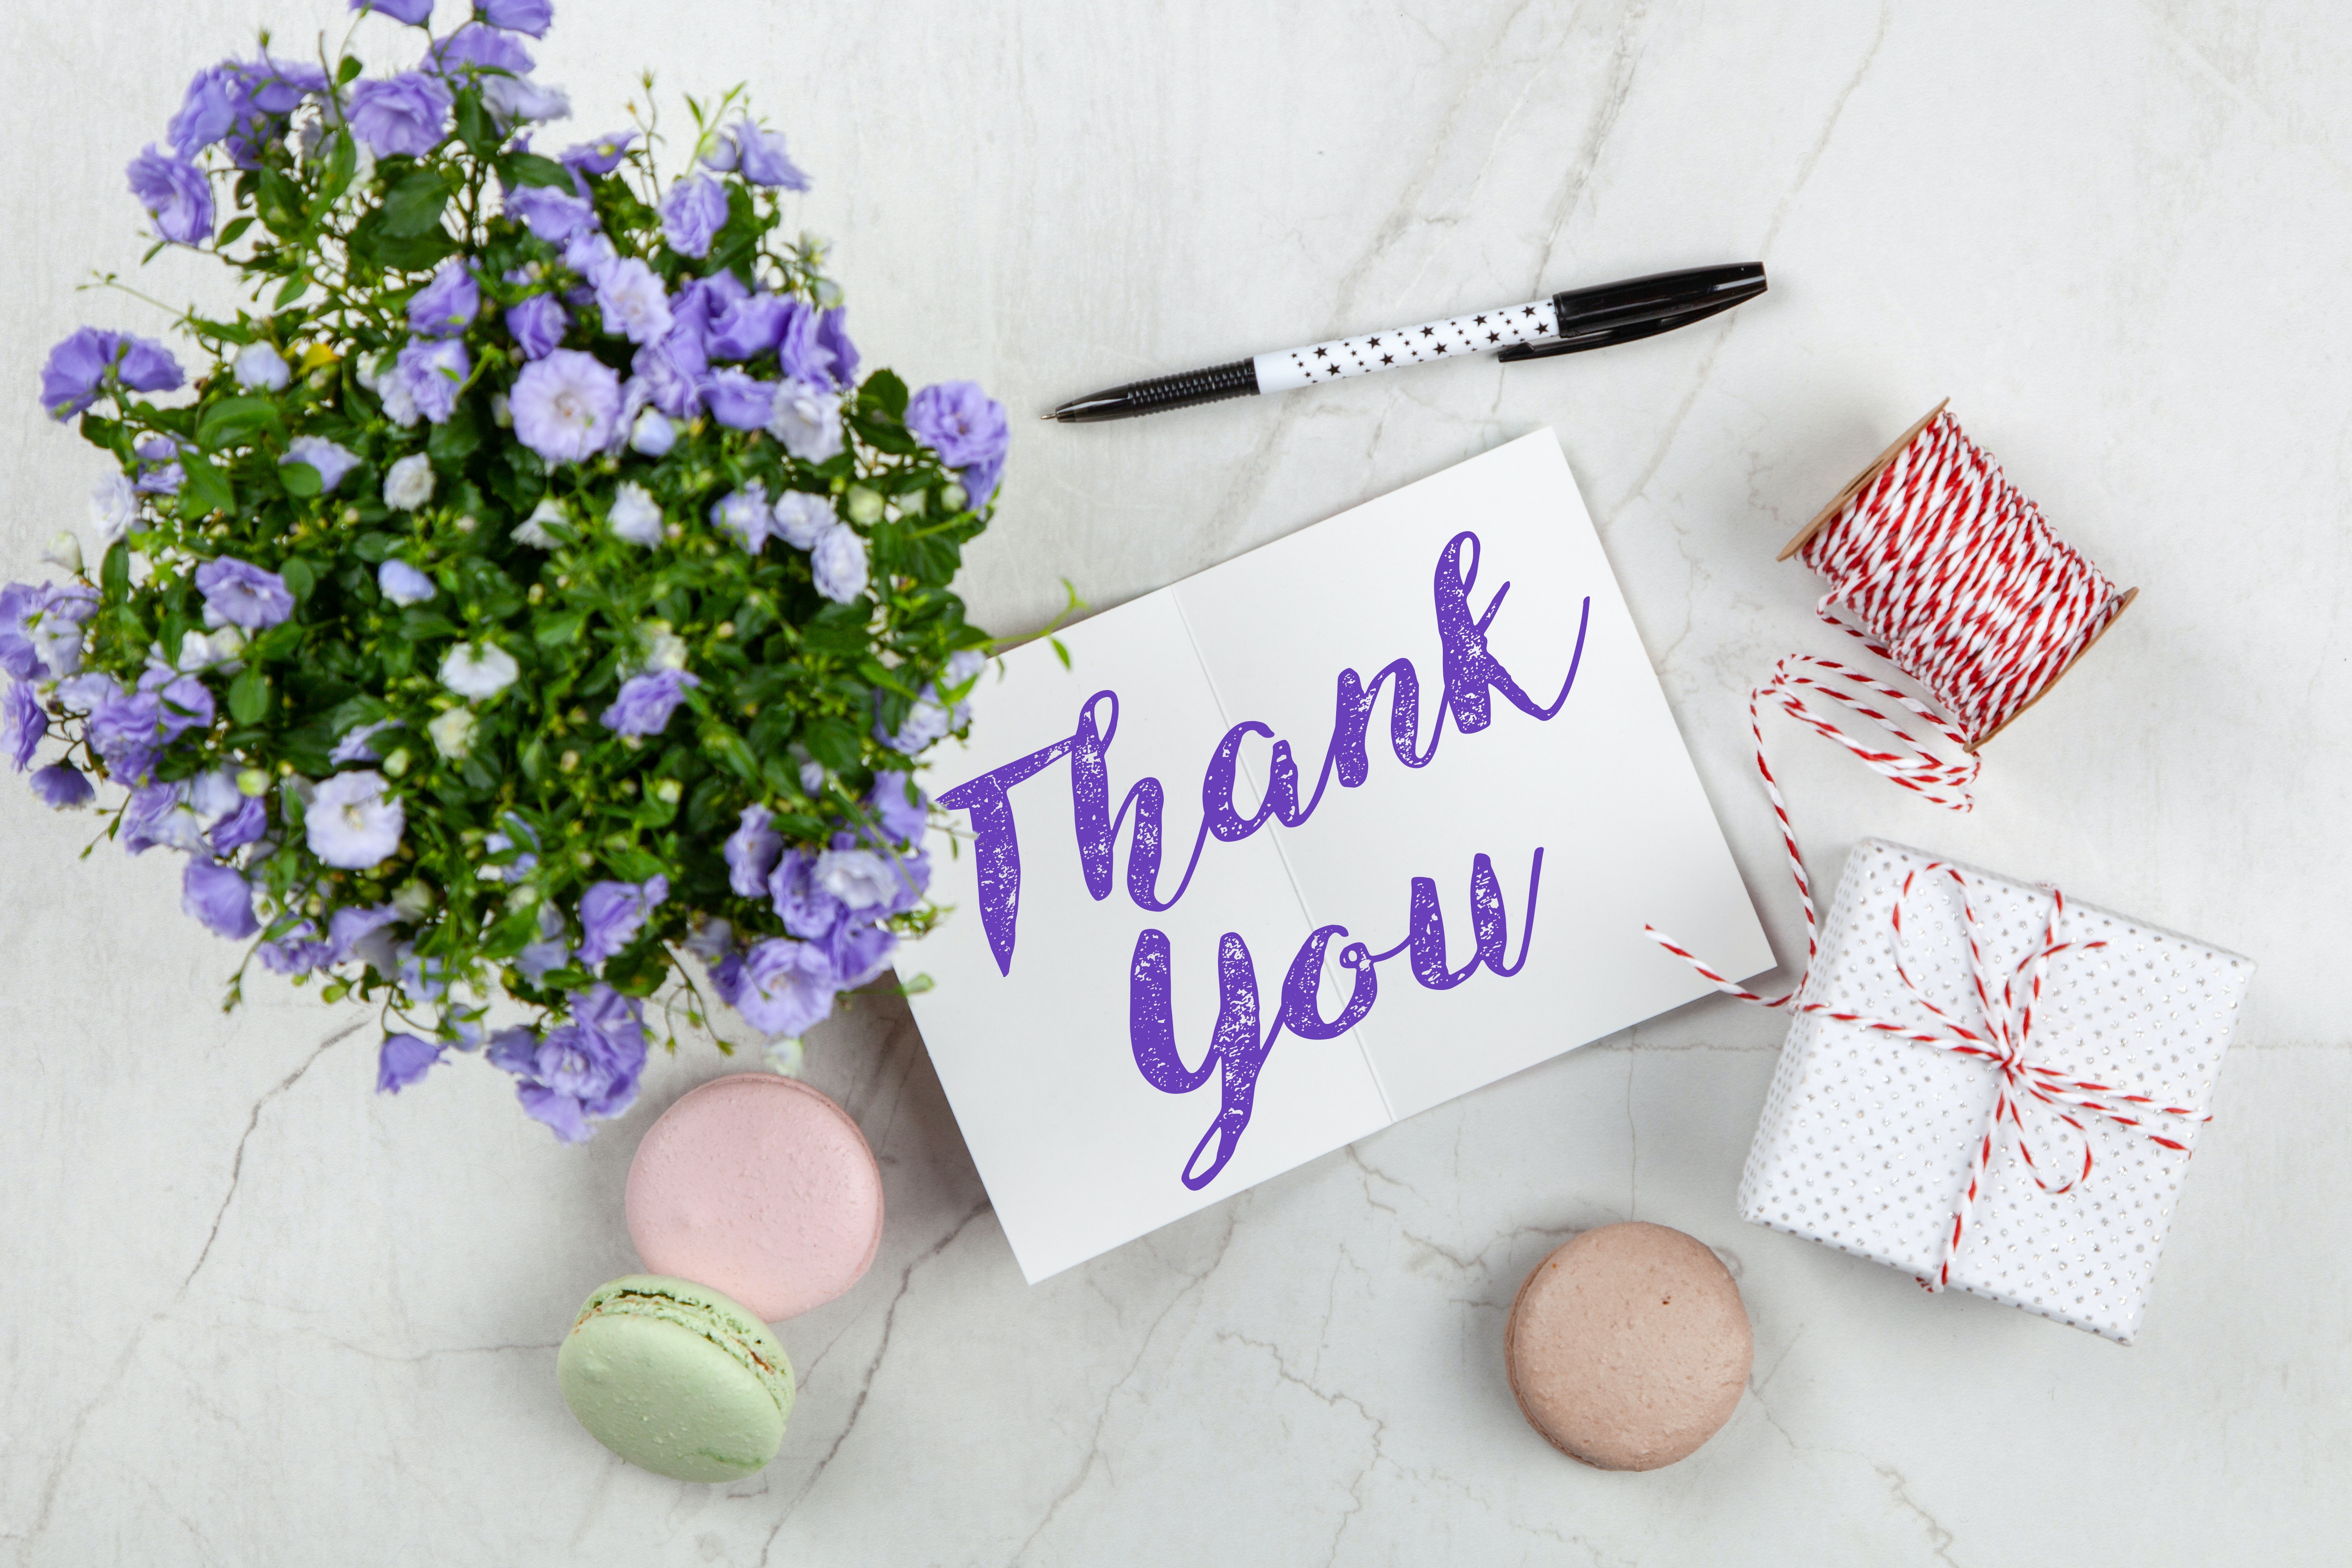 thank you card on marble table with gift box, twine, flowers, and macaroons